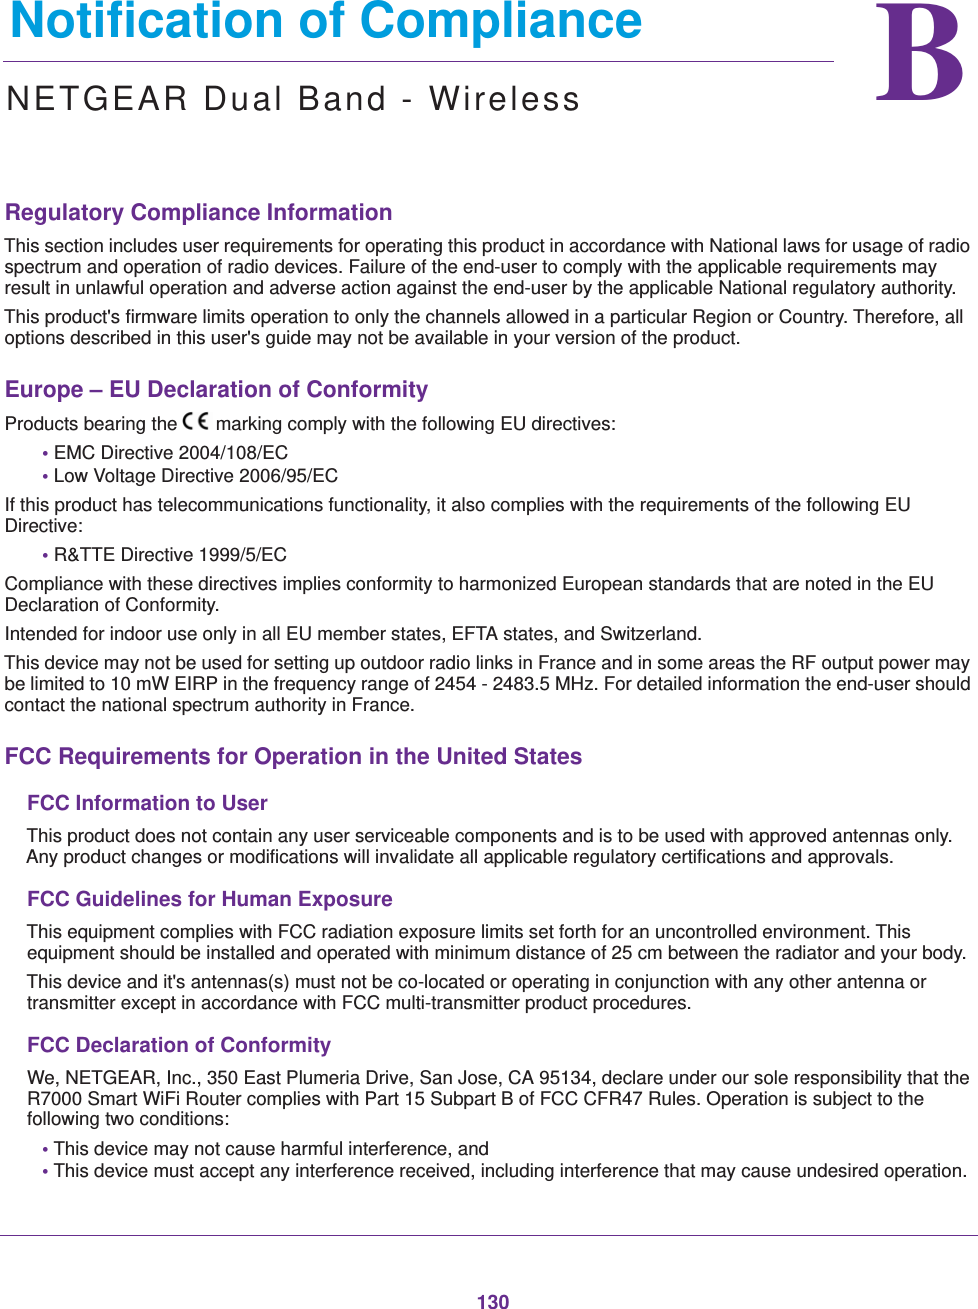 130BB.   Notification of ComplianceNETGEAR Dual Band - WirelessRegulatory Compliance InformationThis section includes user requirements for operating this product in accordance with National laws for usage of radio spectrum and operation of radio devices. Failure of the end-user to comply with the applicable requirements may result in unlawful operation and adverse action against the end-user by the applicable National regulatory authority.This product&apos;s firmware limits operation to only the channels allowed in a particular Region or Country. Therefore, all options described in this user&apos;s guide may not be available in your version of the product.Europe – EU Declaration of Conformity Products bearing the marking comply with the following EU directives:• EMC Directive 2004/108/EC• Low Voltage Directive 2006/95/ECIf this product has telecommunications functionality, it also complies with the requirements of the following EU Directive:• R&amp;TTE Directive 1999/5/ECCompliance with these directives implies conformity to harmonized European standards that are noted in the EU Declaration of Conformity. Intended for indoor use only in all EU member states, EFTA states, and Switzerland.This device may not be used for setting up outdoor radio links in France and in some areas the RF output power may be limited to 10 mW EIRP in the frequency range of 2454 - 2483.5 MHz. For detailed information the end-user should contact the national spectrum authority in France.FCC Requirements for Operation in the United States FCC Information to UserThis product does not contain any user serviceable components and is to be used with approved antennas only. Any product changes or modifications will invalidate all applicable regulatory certifications and approvals.FCC Guidelines for Human ExposureThis equipment complies with FCC radiation exposure limits set forth for an uncontrolled environment. This equipment should be installed and operated with minimum distance of 25 cm between the radiator and your body.This device and it&apos;s antennas(s) must not be co-located or operating in conjunction with any other antenna or transmitter except in accordance with FCC multi-transmitter product procedures.FCC Declaration of ConformityWe, NETGEAR, Inc., 350 East Plumeria Drive, San Jose, CA 95134, declare under our sole responsibility that the R7000 Smart WiFi Router complies with Part 15 Subpart B of FCC CFR47 Rules. Operation is subject to the following two conditions:• This device may not cause harmful interference, and• This device must accept any interference received, including interference that may cause undesired operation.